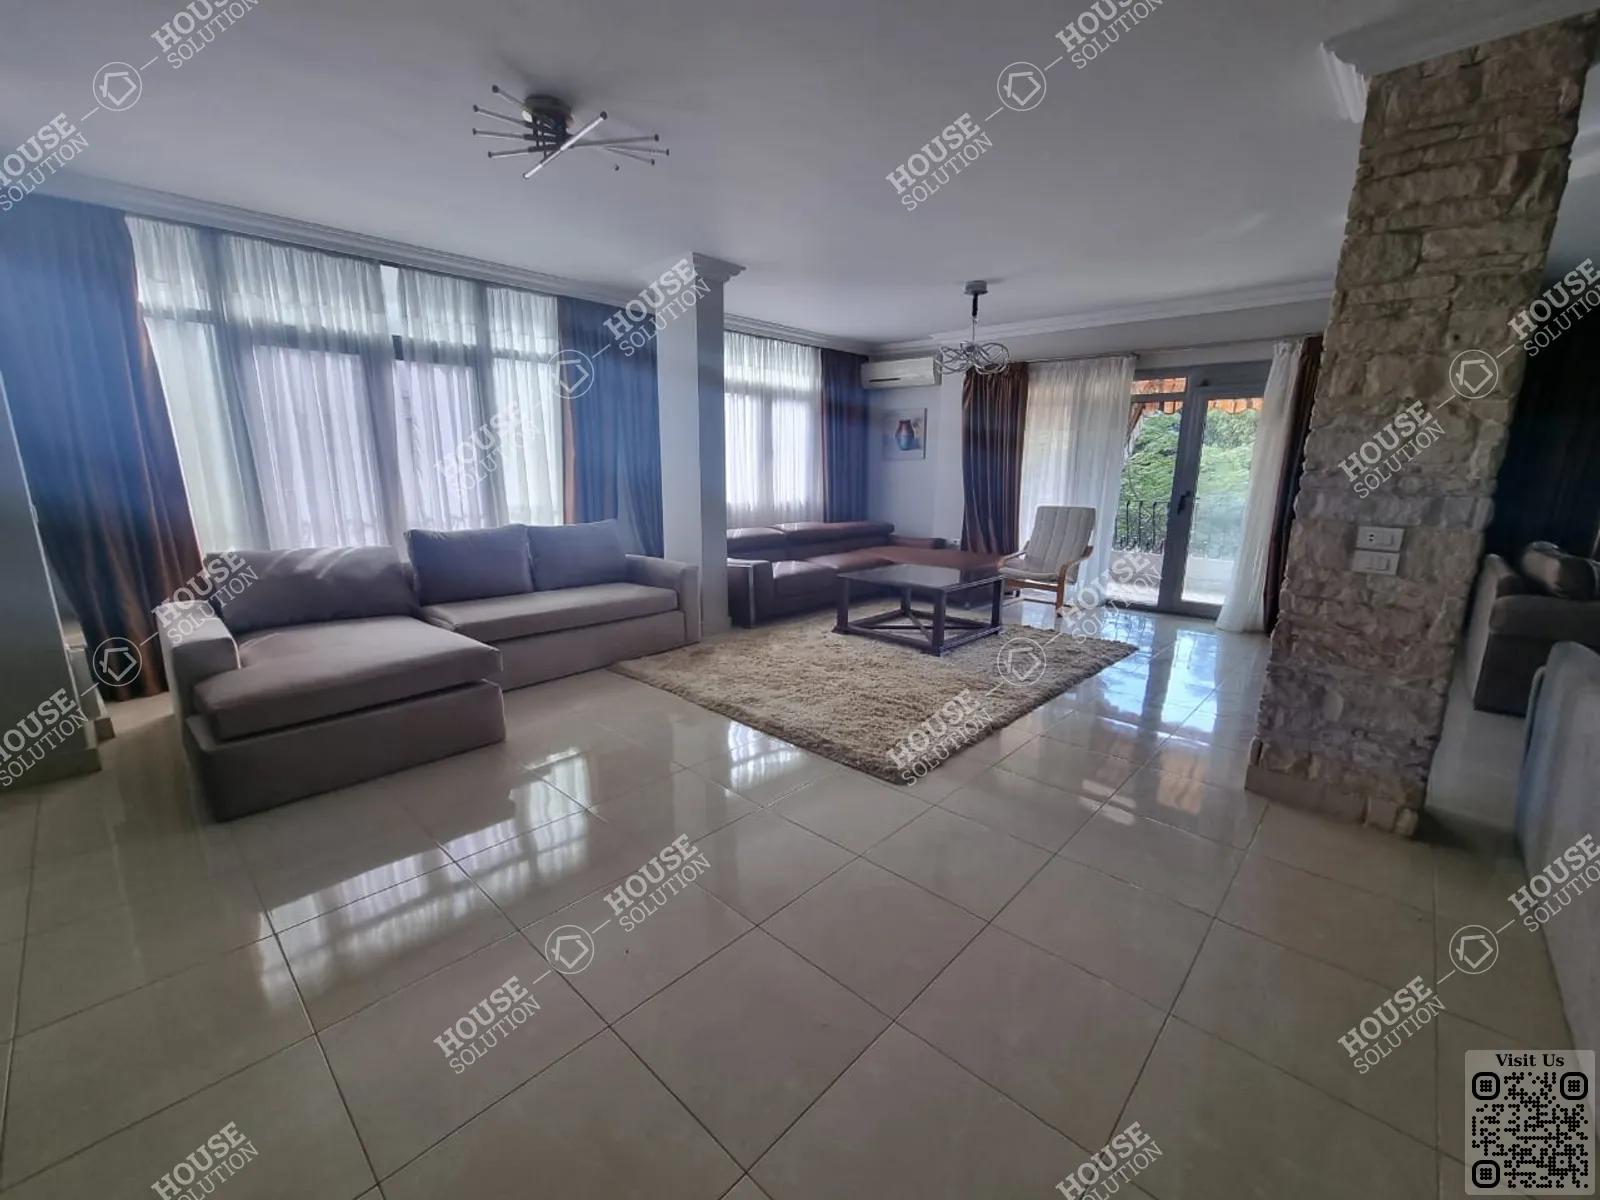 RECEPTION  @ Apartments For Rent In Maadi Maadi Sarayat Area: 275 m² consists of 4 Bedrooms 3 Bathrooms Modern furnished 5 stars #5629-2